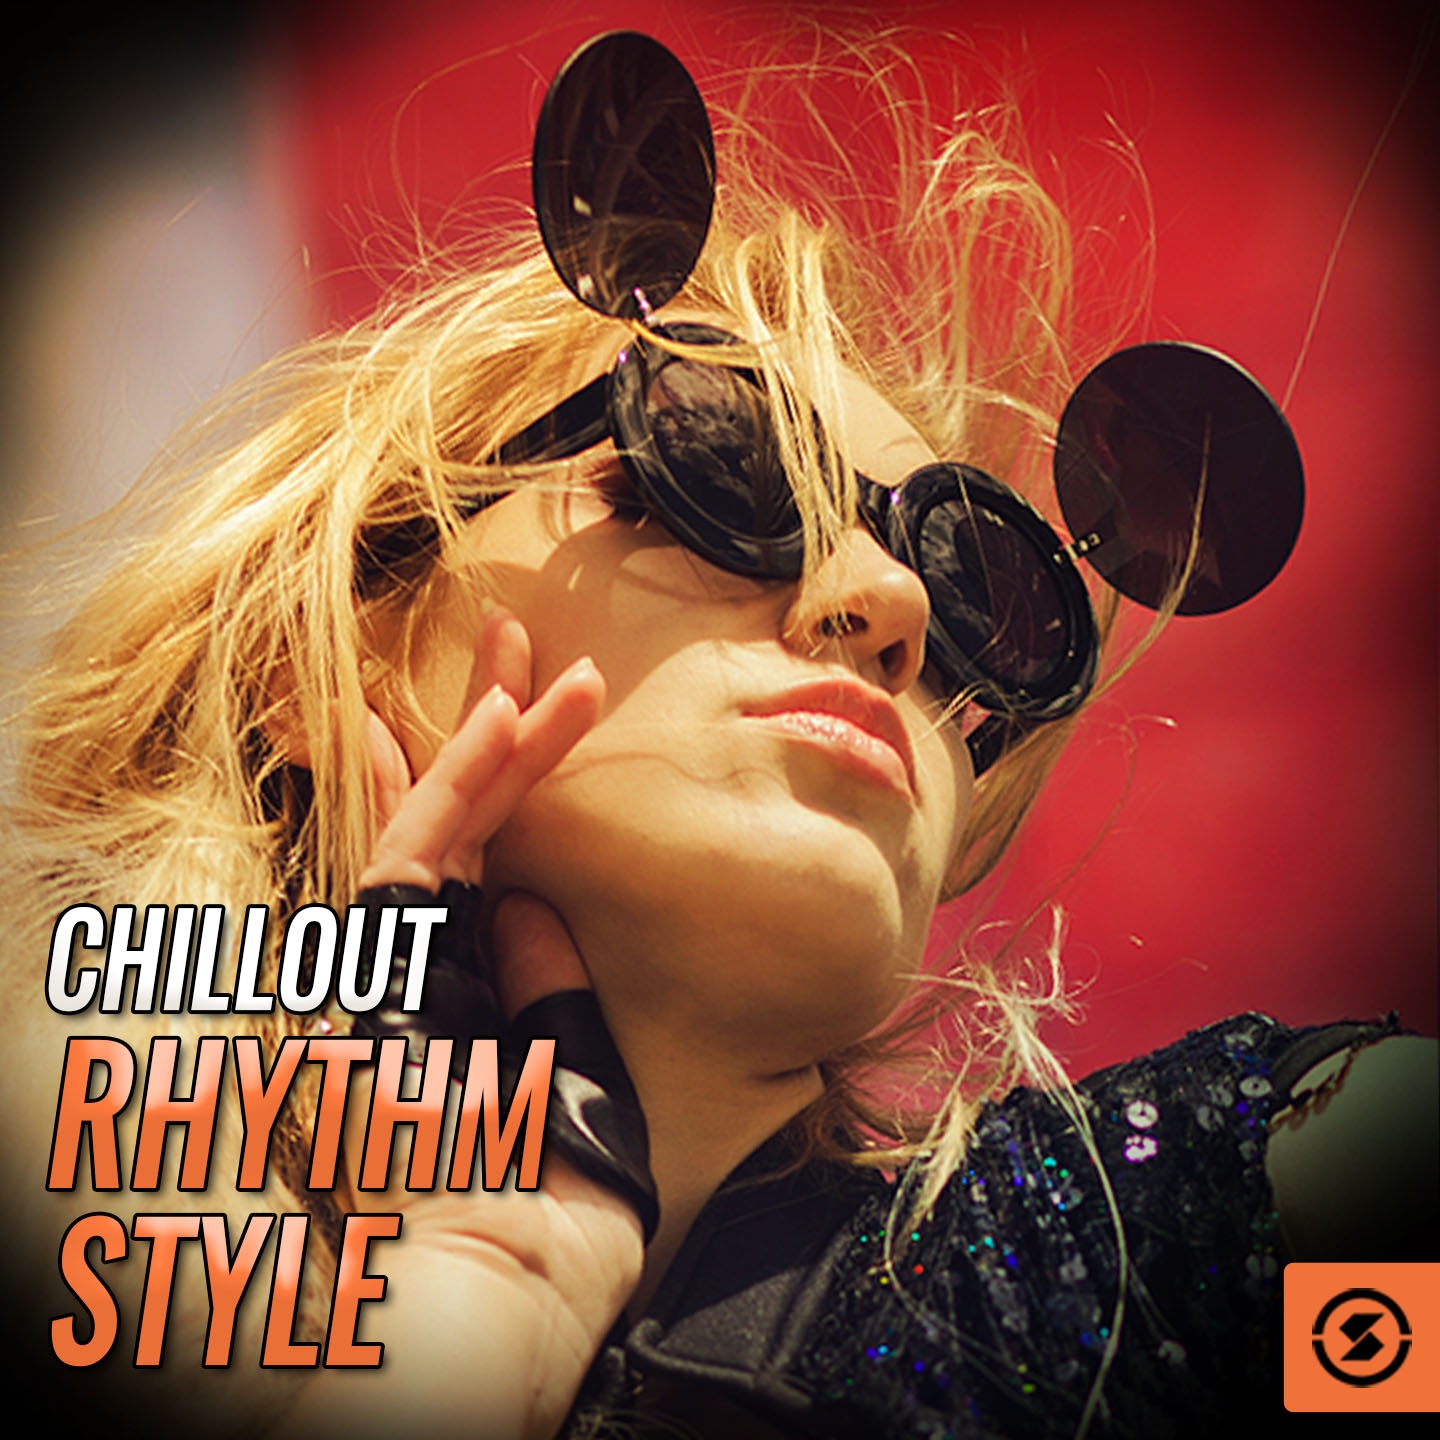 Chillout Rhythm Style